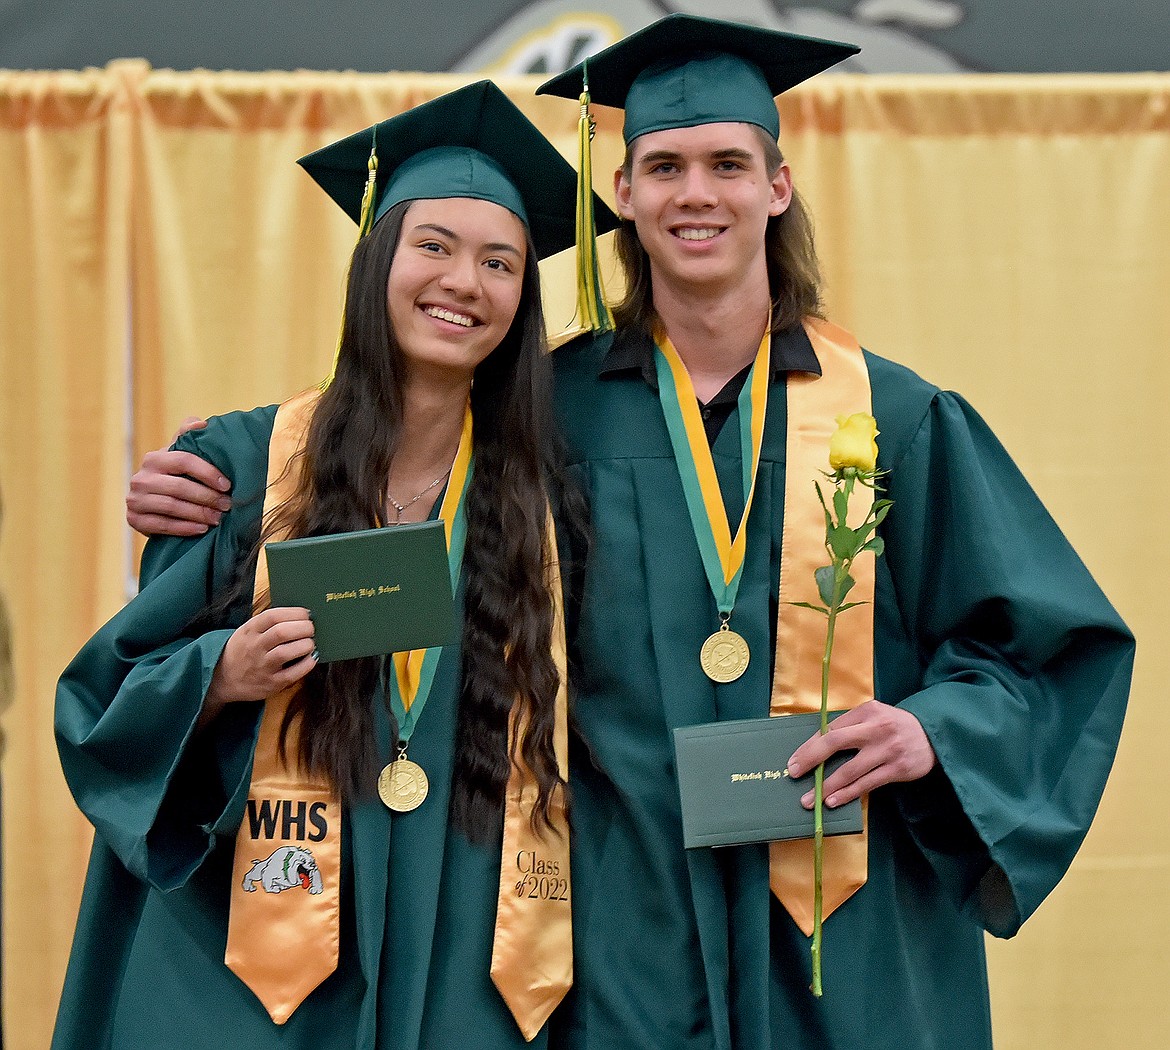 Sydney and Barrett Garcia graduate with the Whitefish High School Class of 2022 Saturday during a commencement ceremony at the high school gym. (Whitney England/Whitefish Pilot)